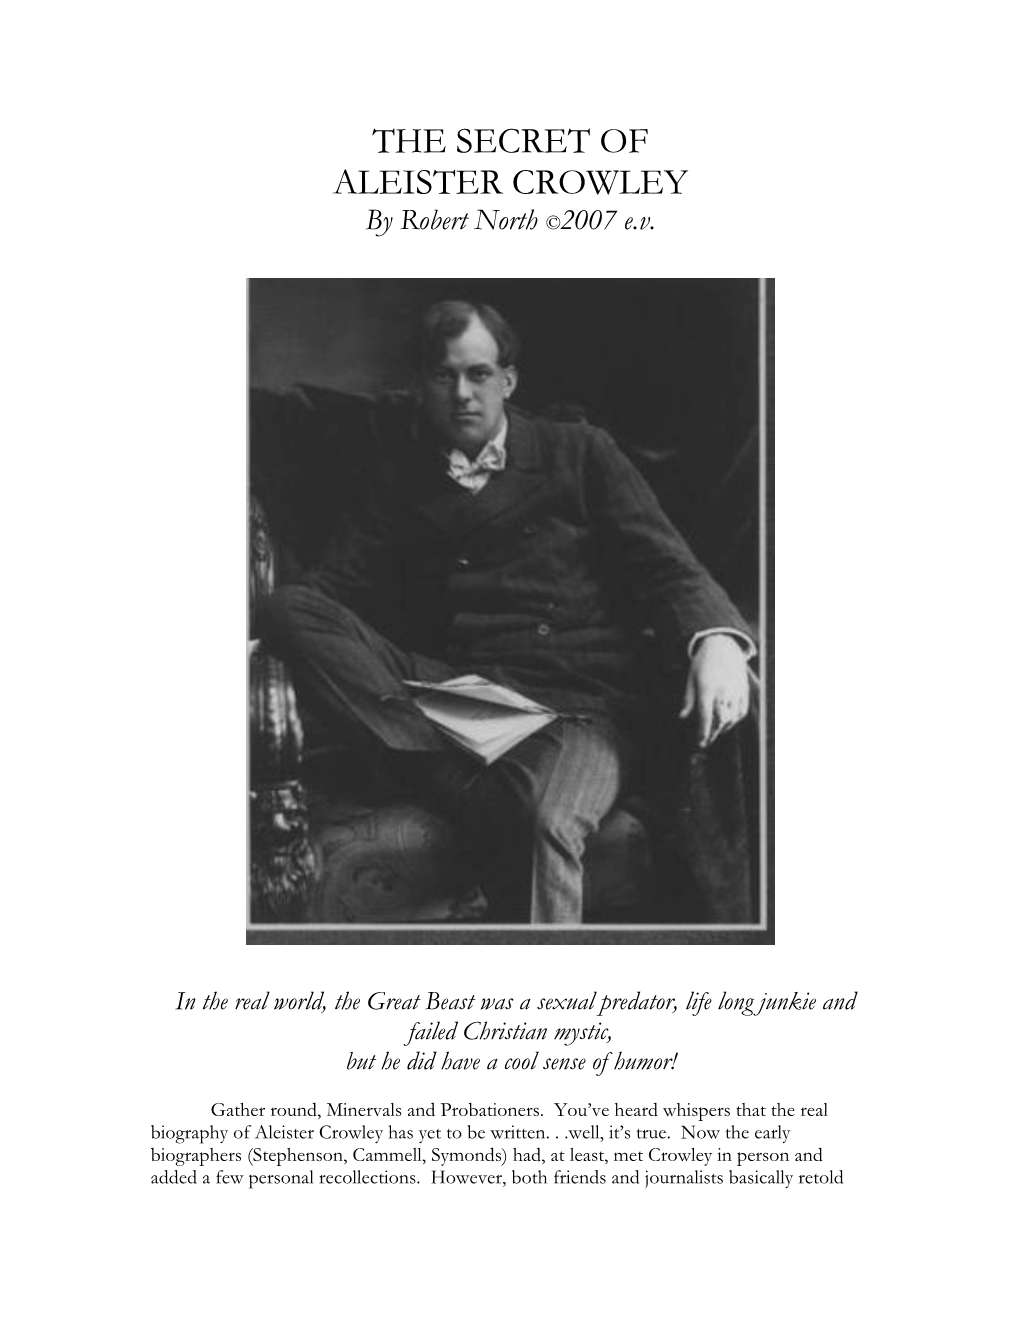 THE SECRET of ALEISTER CROWLEY by Robert North ©2007 E.V